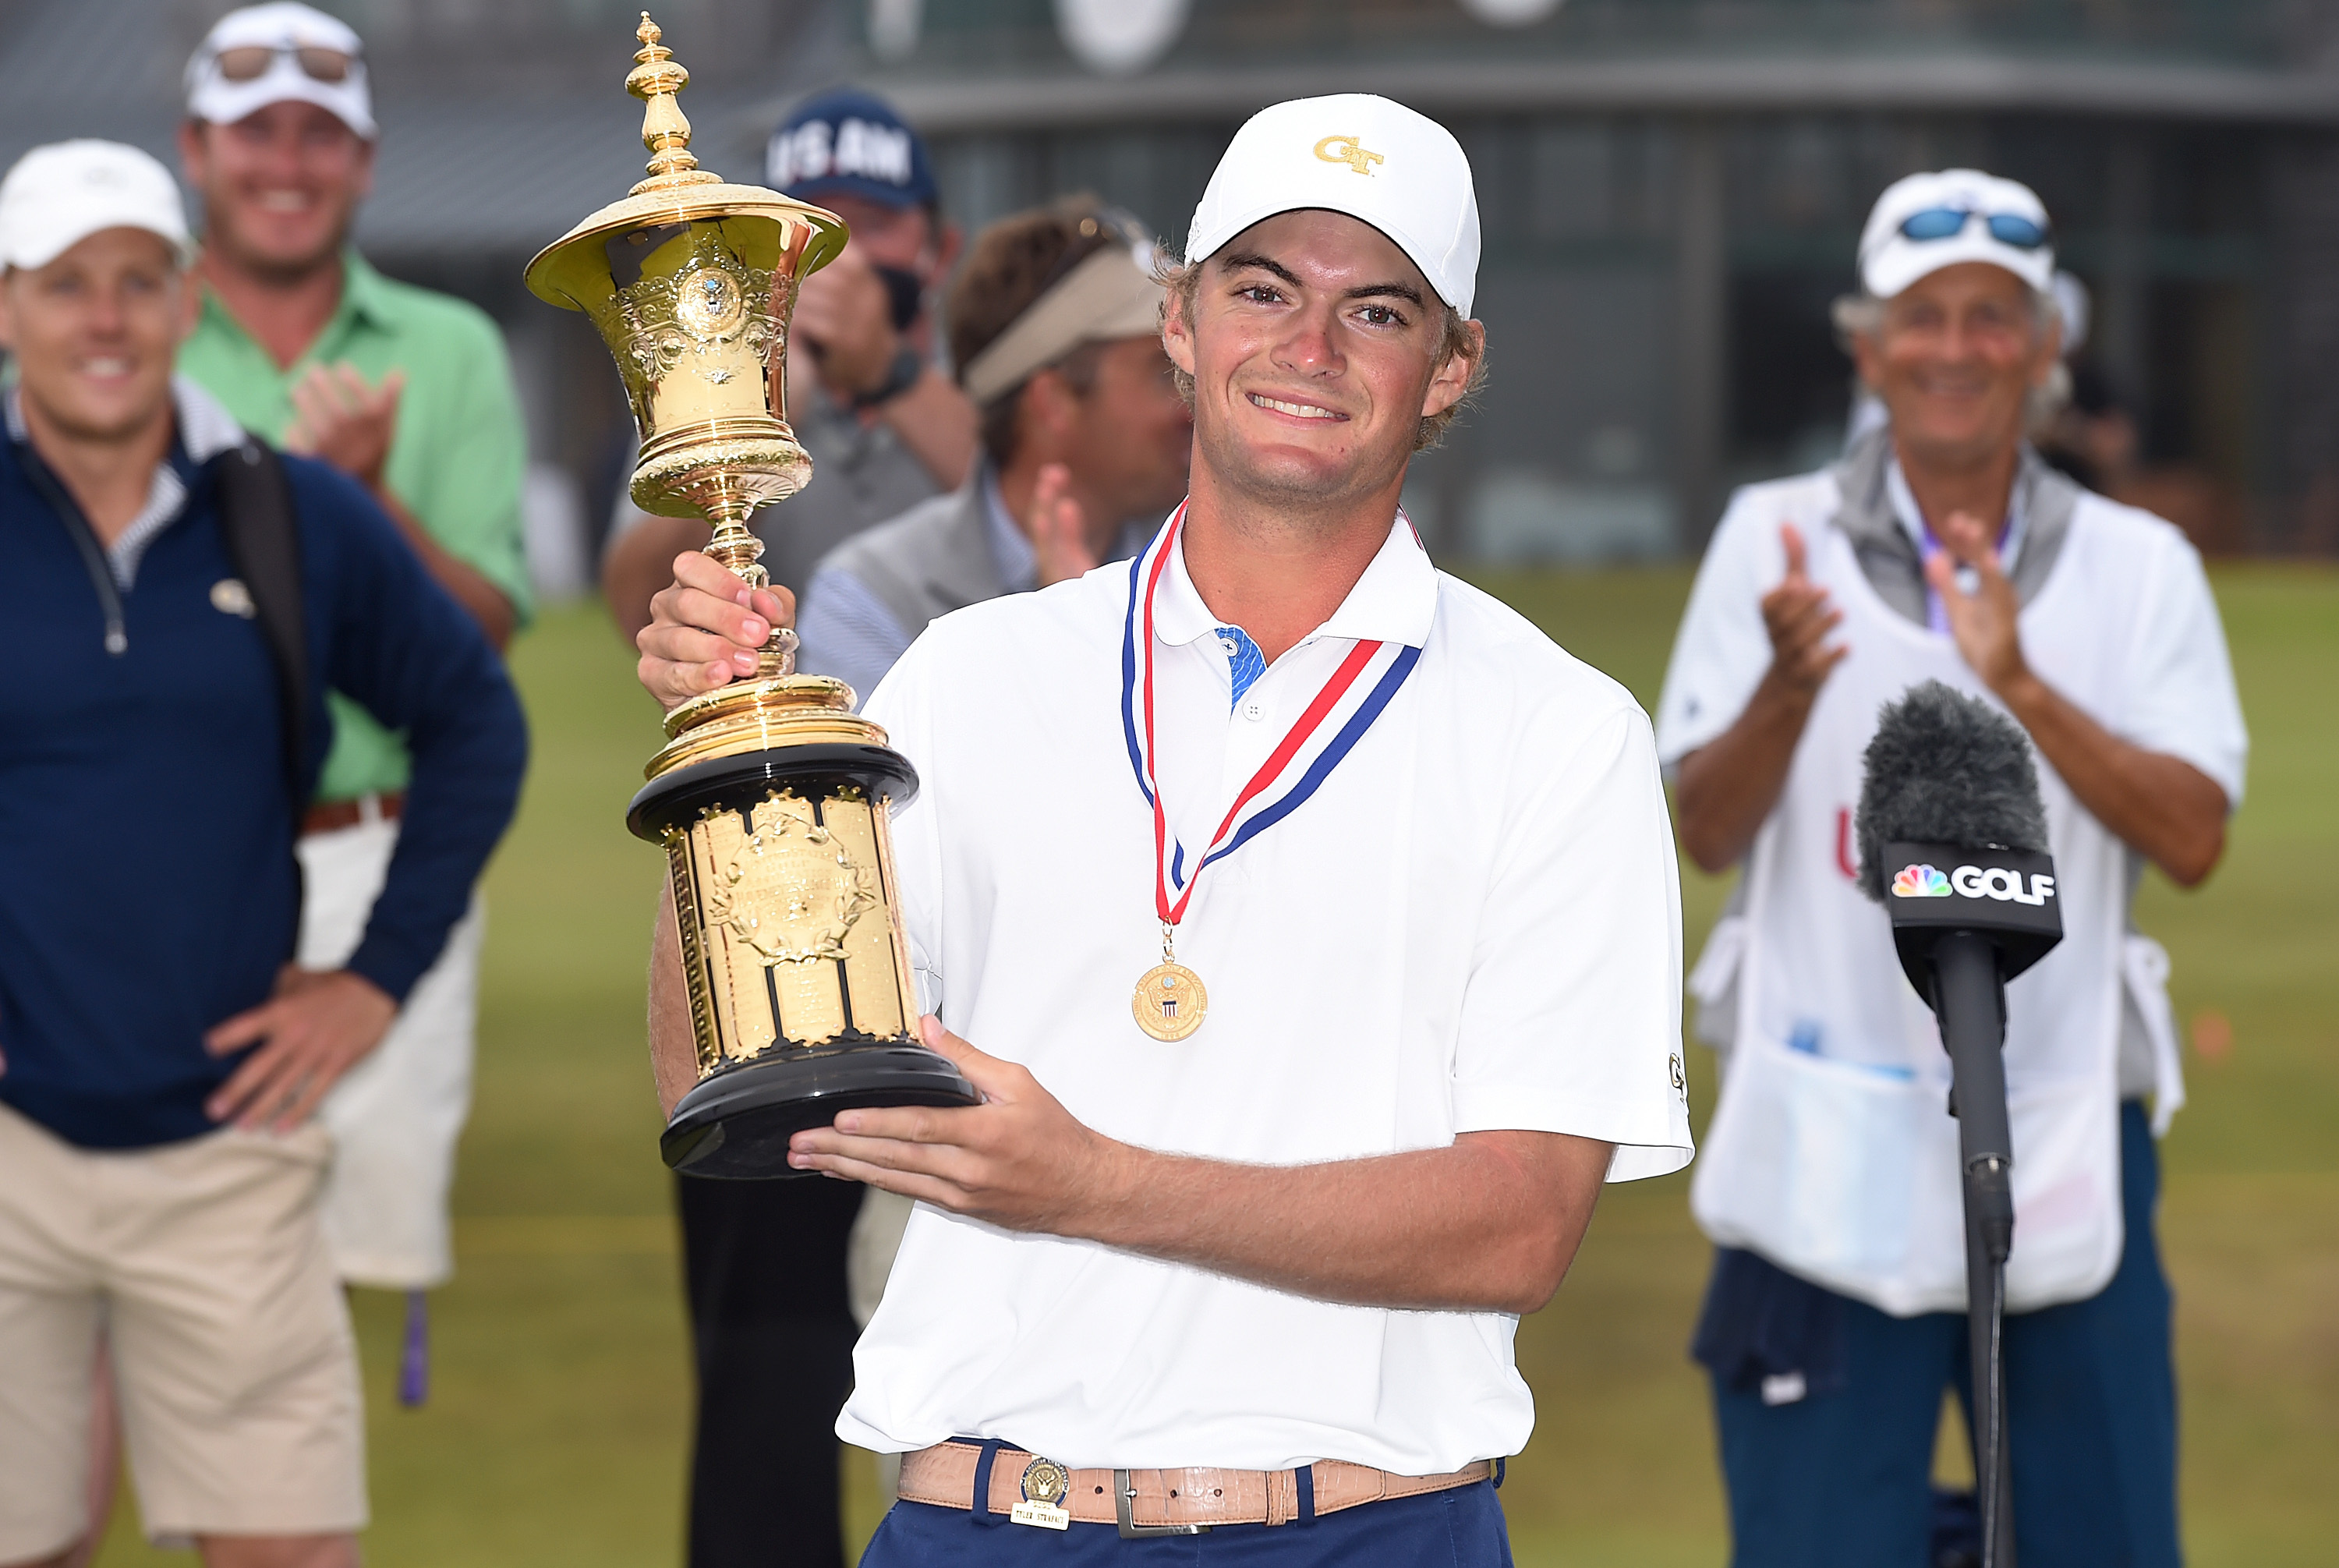 Tyler Strafaci and the U.S. Amateur Trophy